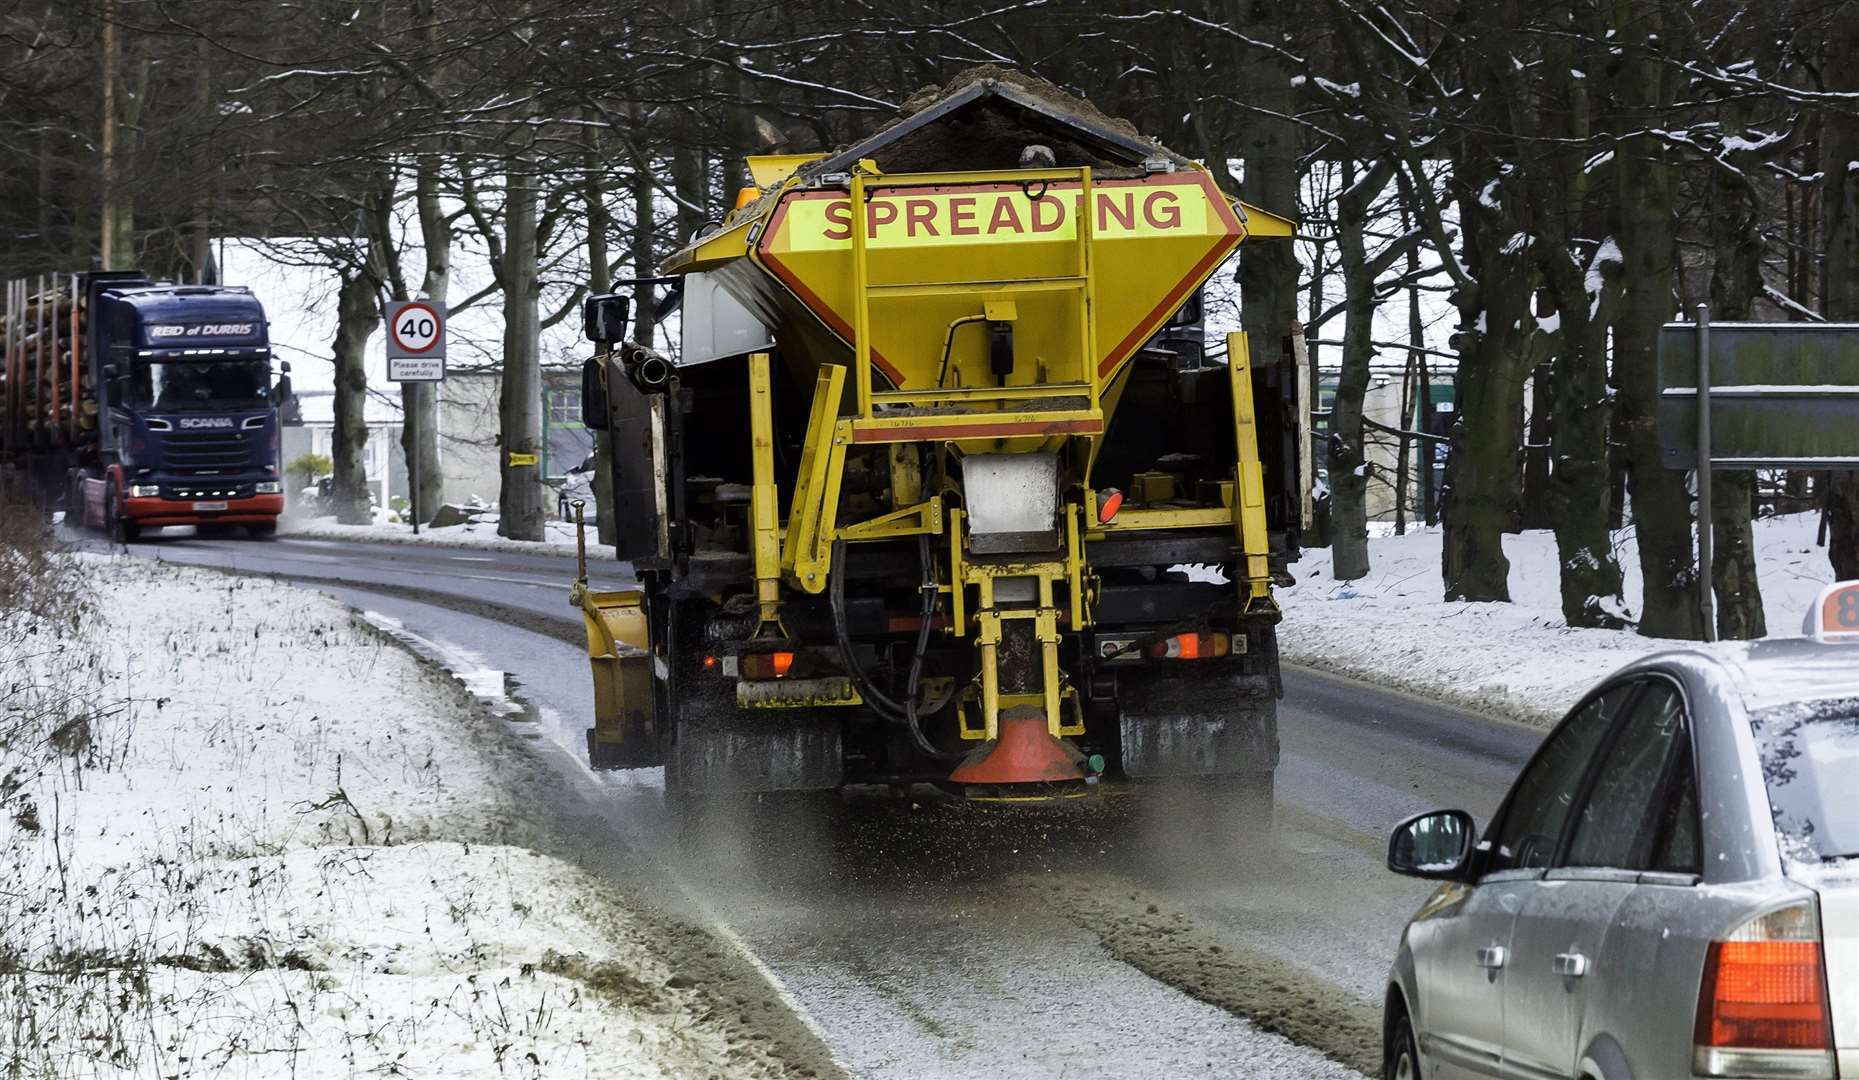 The local authority is developing contingency plans for roads winter maintenance.